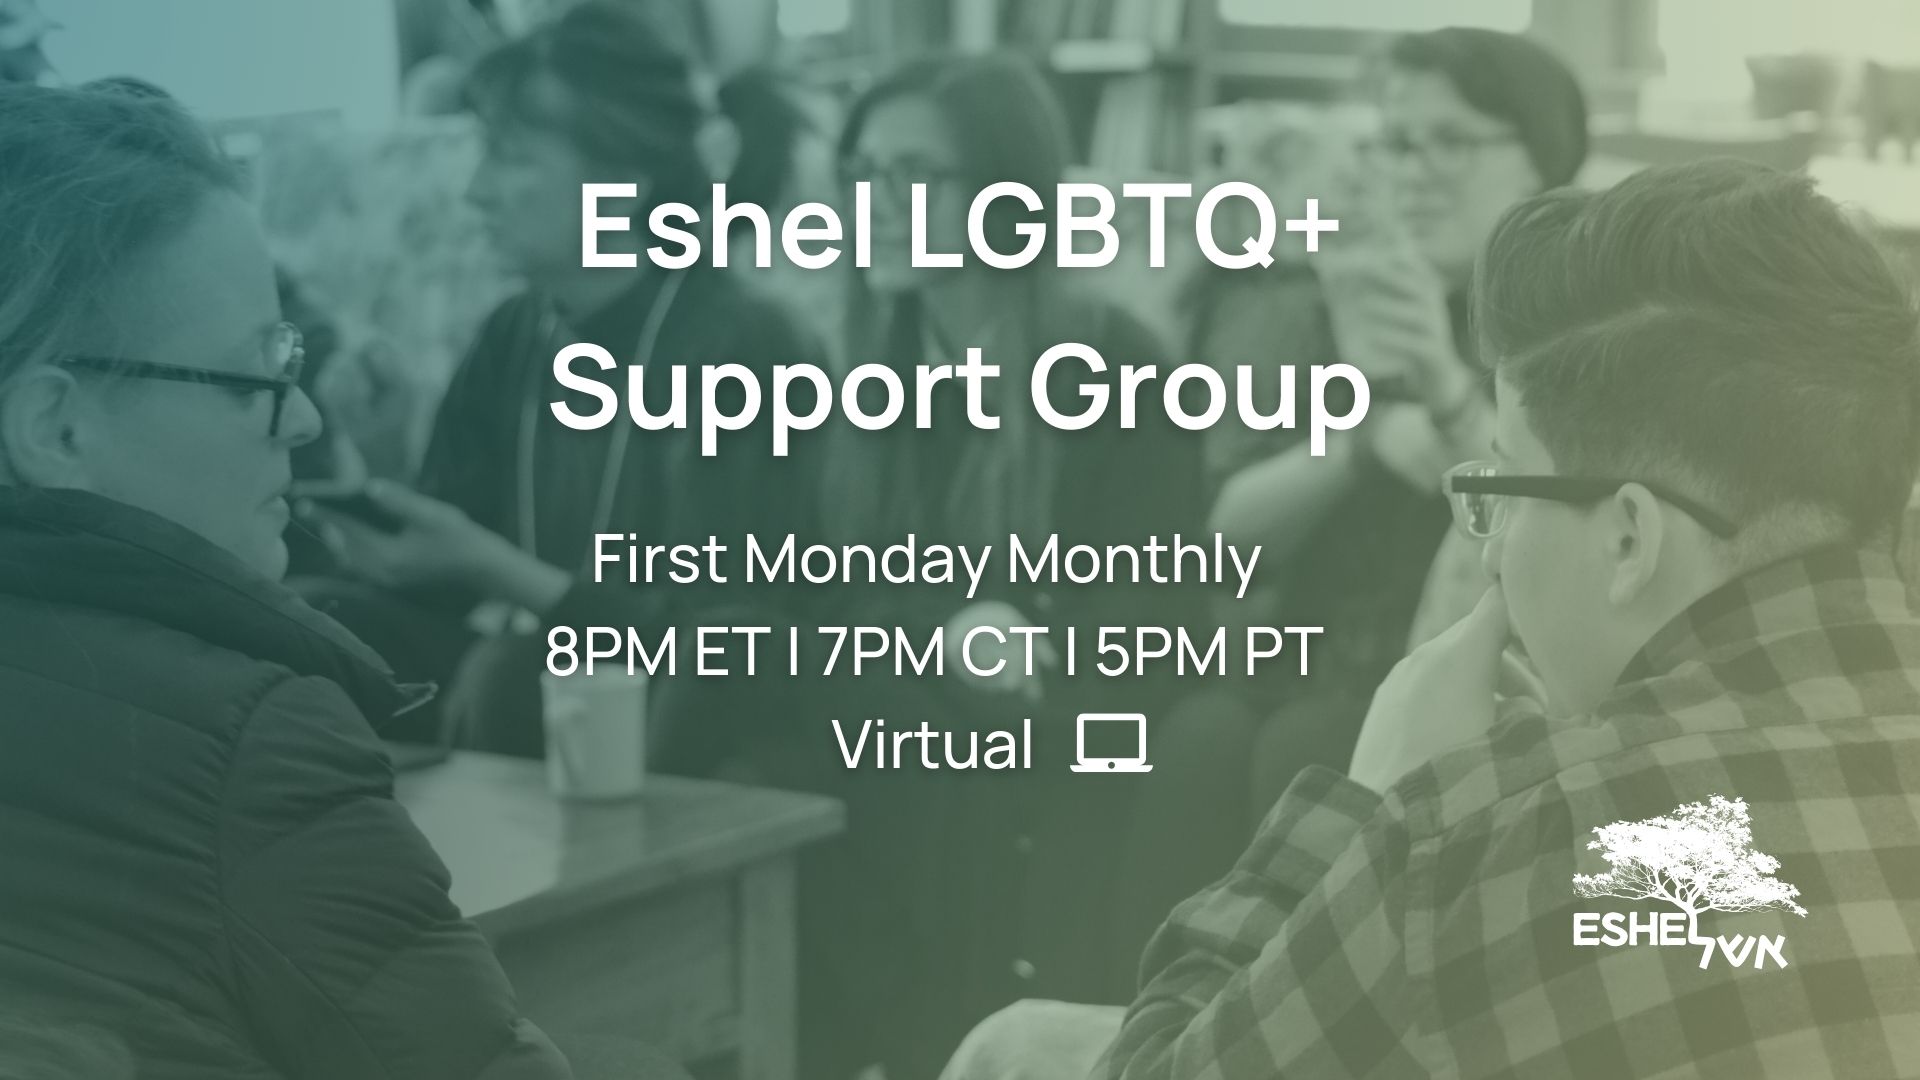 Eshel LGBTQ+ Support Group | First Monday Monthly at 8pm ET/7pm CT/5pm PT | Virtual